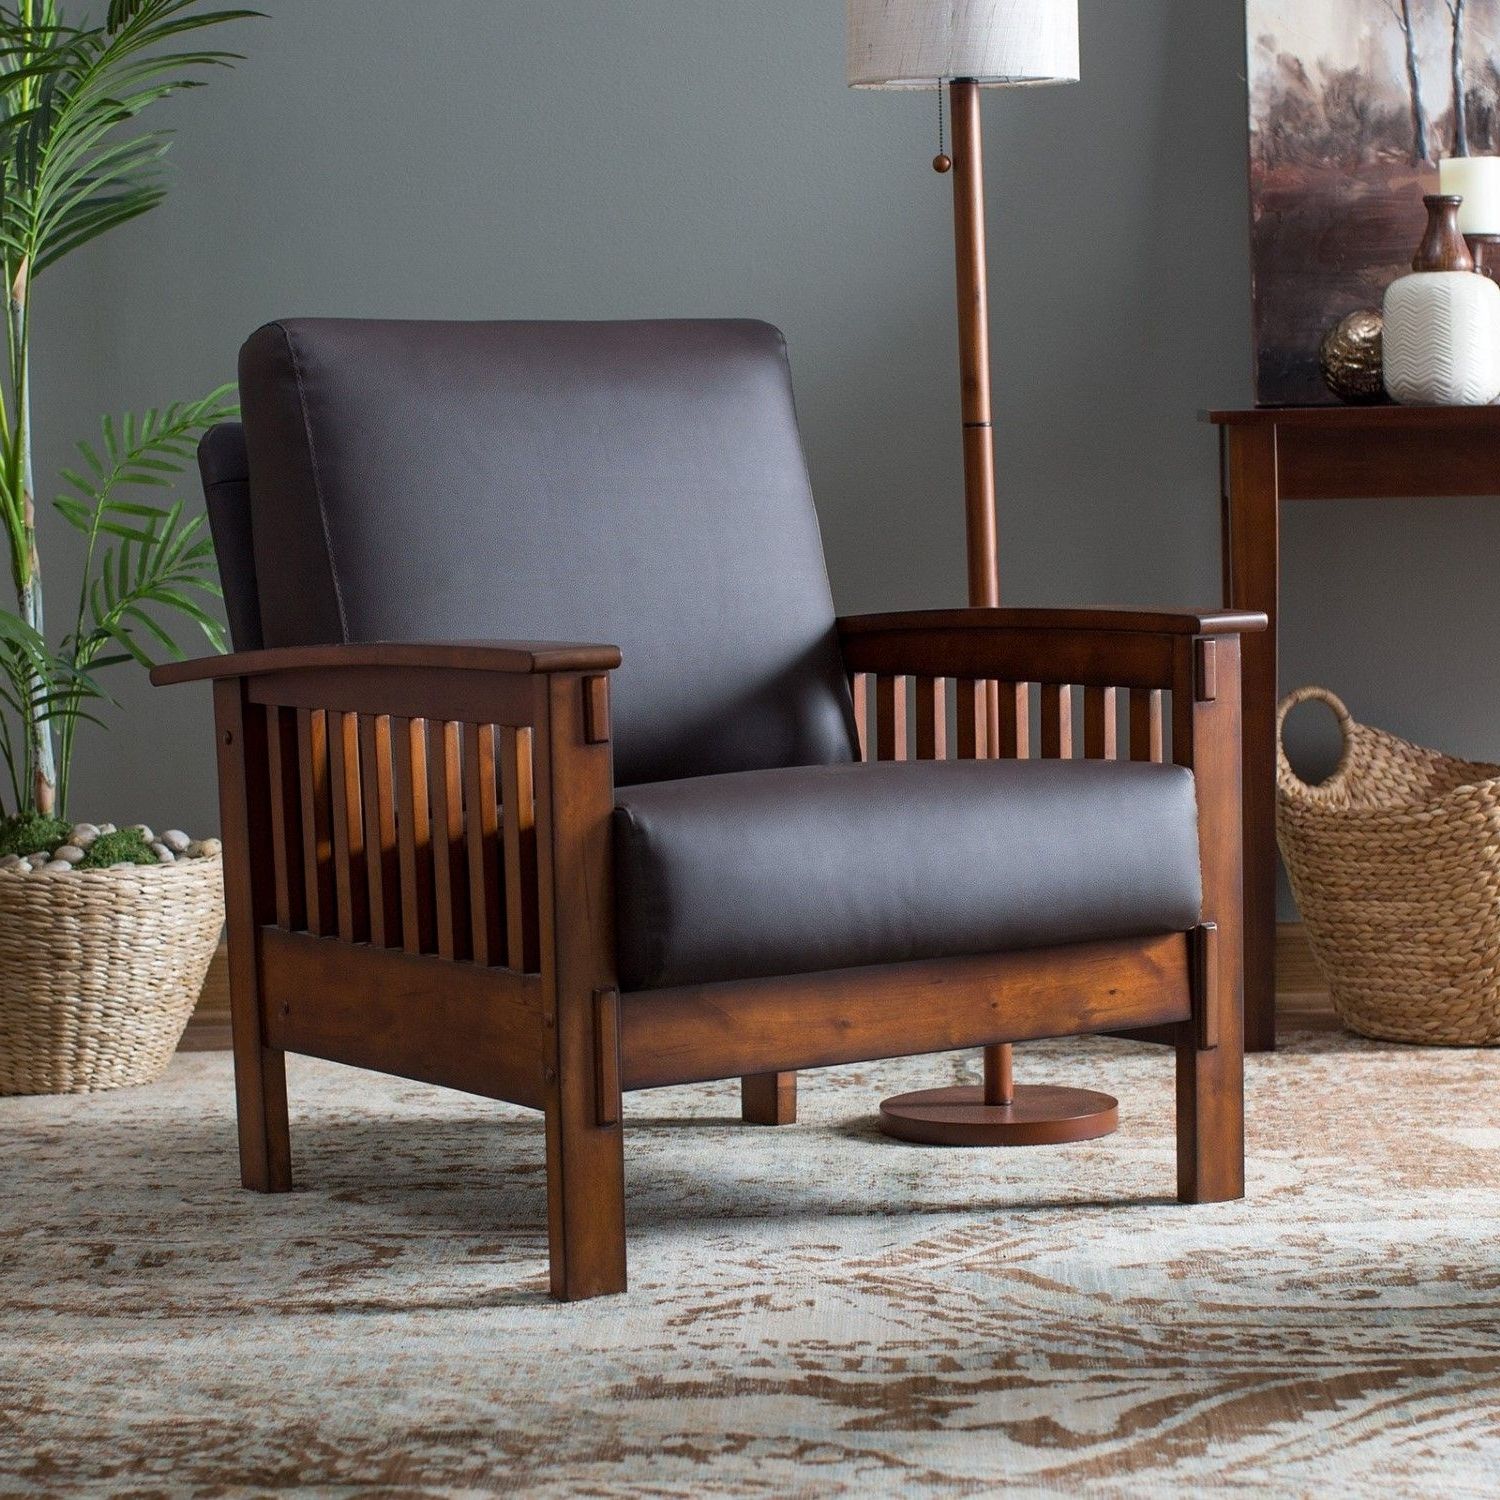 Craftsman Upholstered Side Chairs Within Latest With Its Slatted Sides And Flat Armrests, The Belham Living Burton (View 17 of 20)